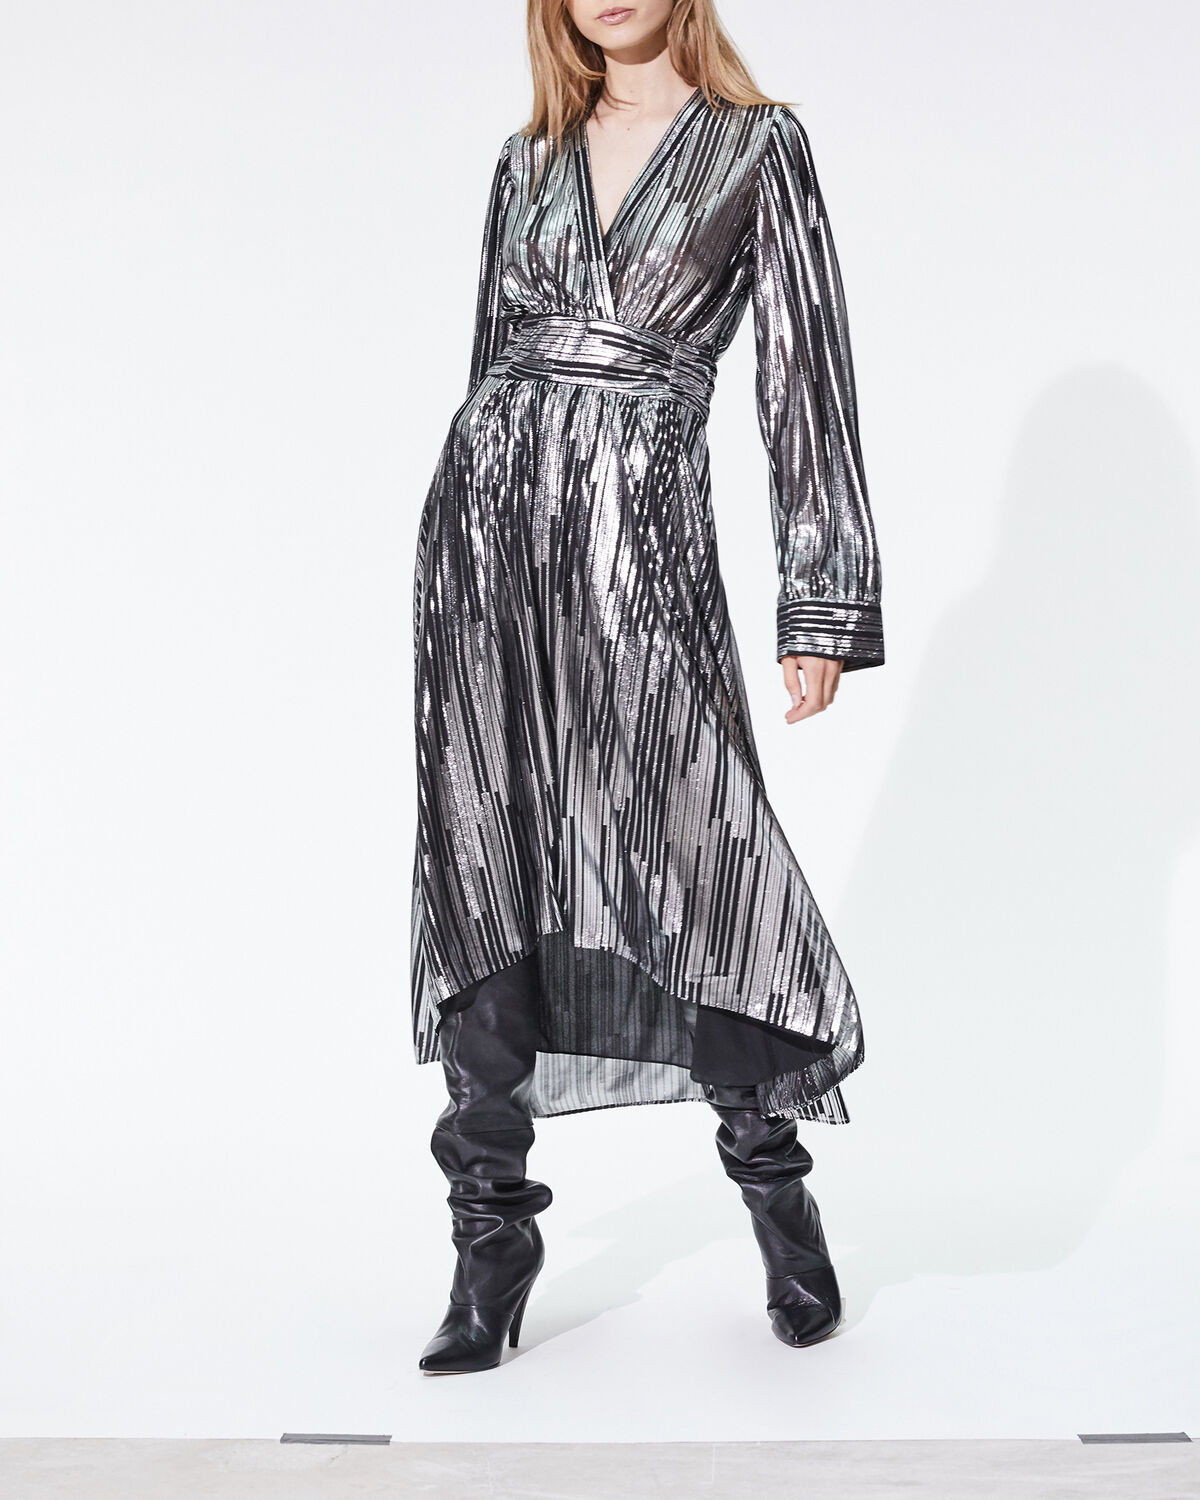 Photo of IRO Paris Eureka Dress Black And Silver - Light And Fluid, This Transparent Dress Is Distinguished By Its Fine Lurex Stripes And Heart-shaped Neckline. Structure Your Silhouette With This Aeriel Piece, Its Tightenable Waist And Puffed Sleeves. Dresses